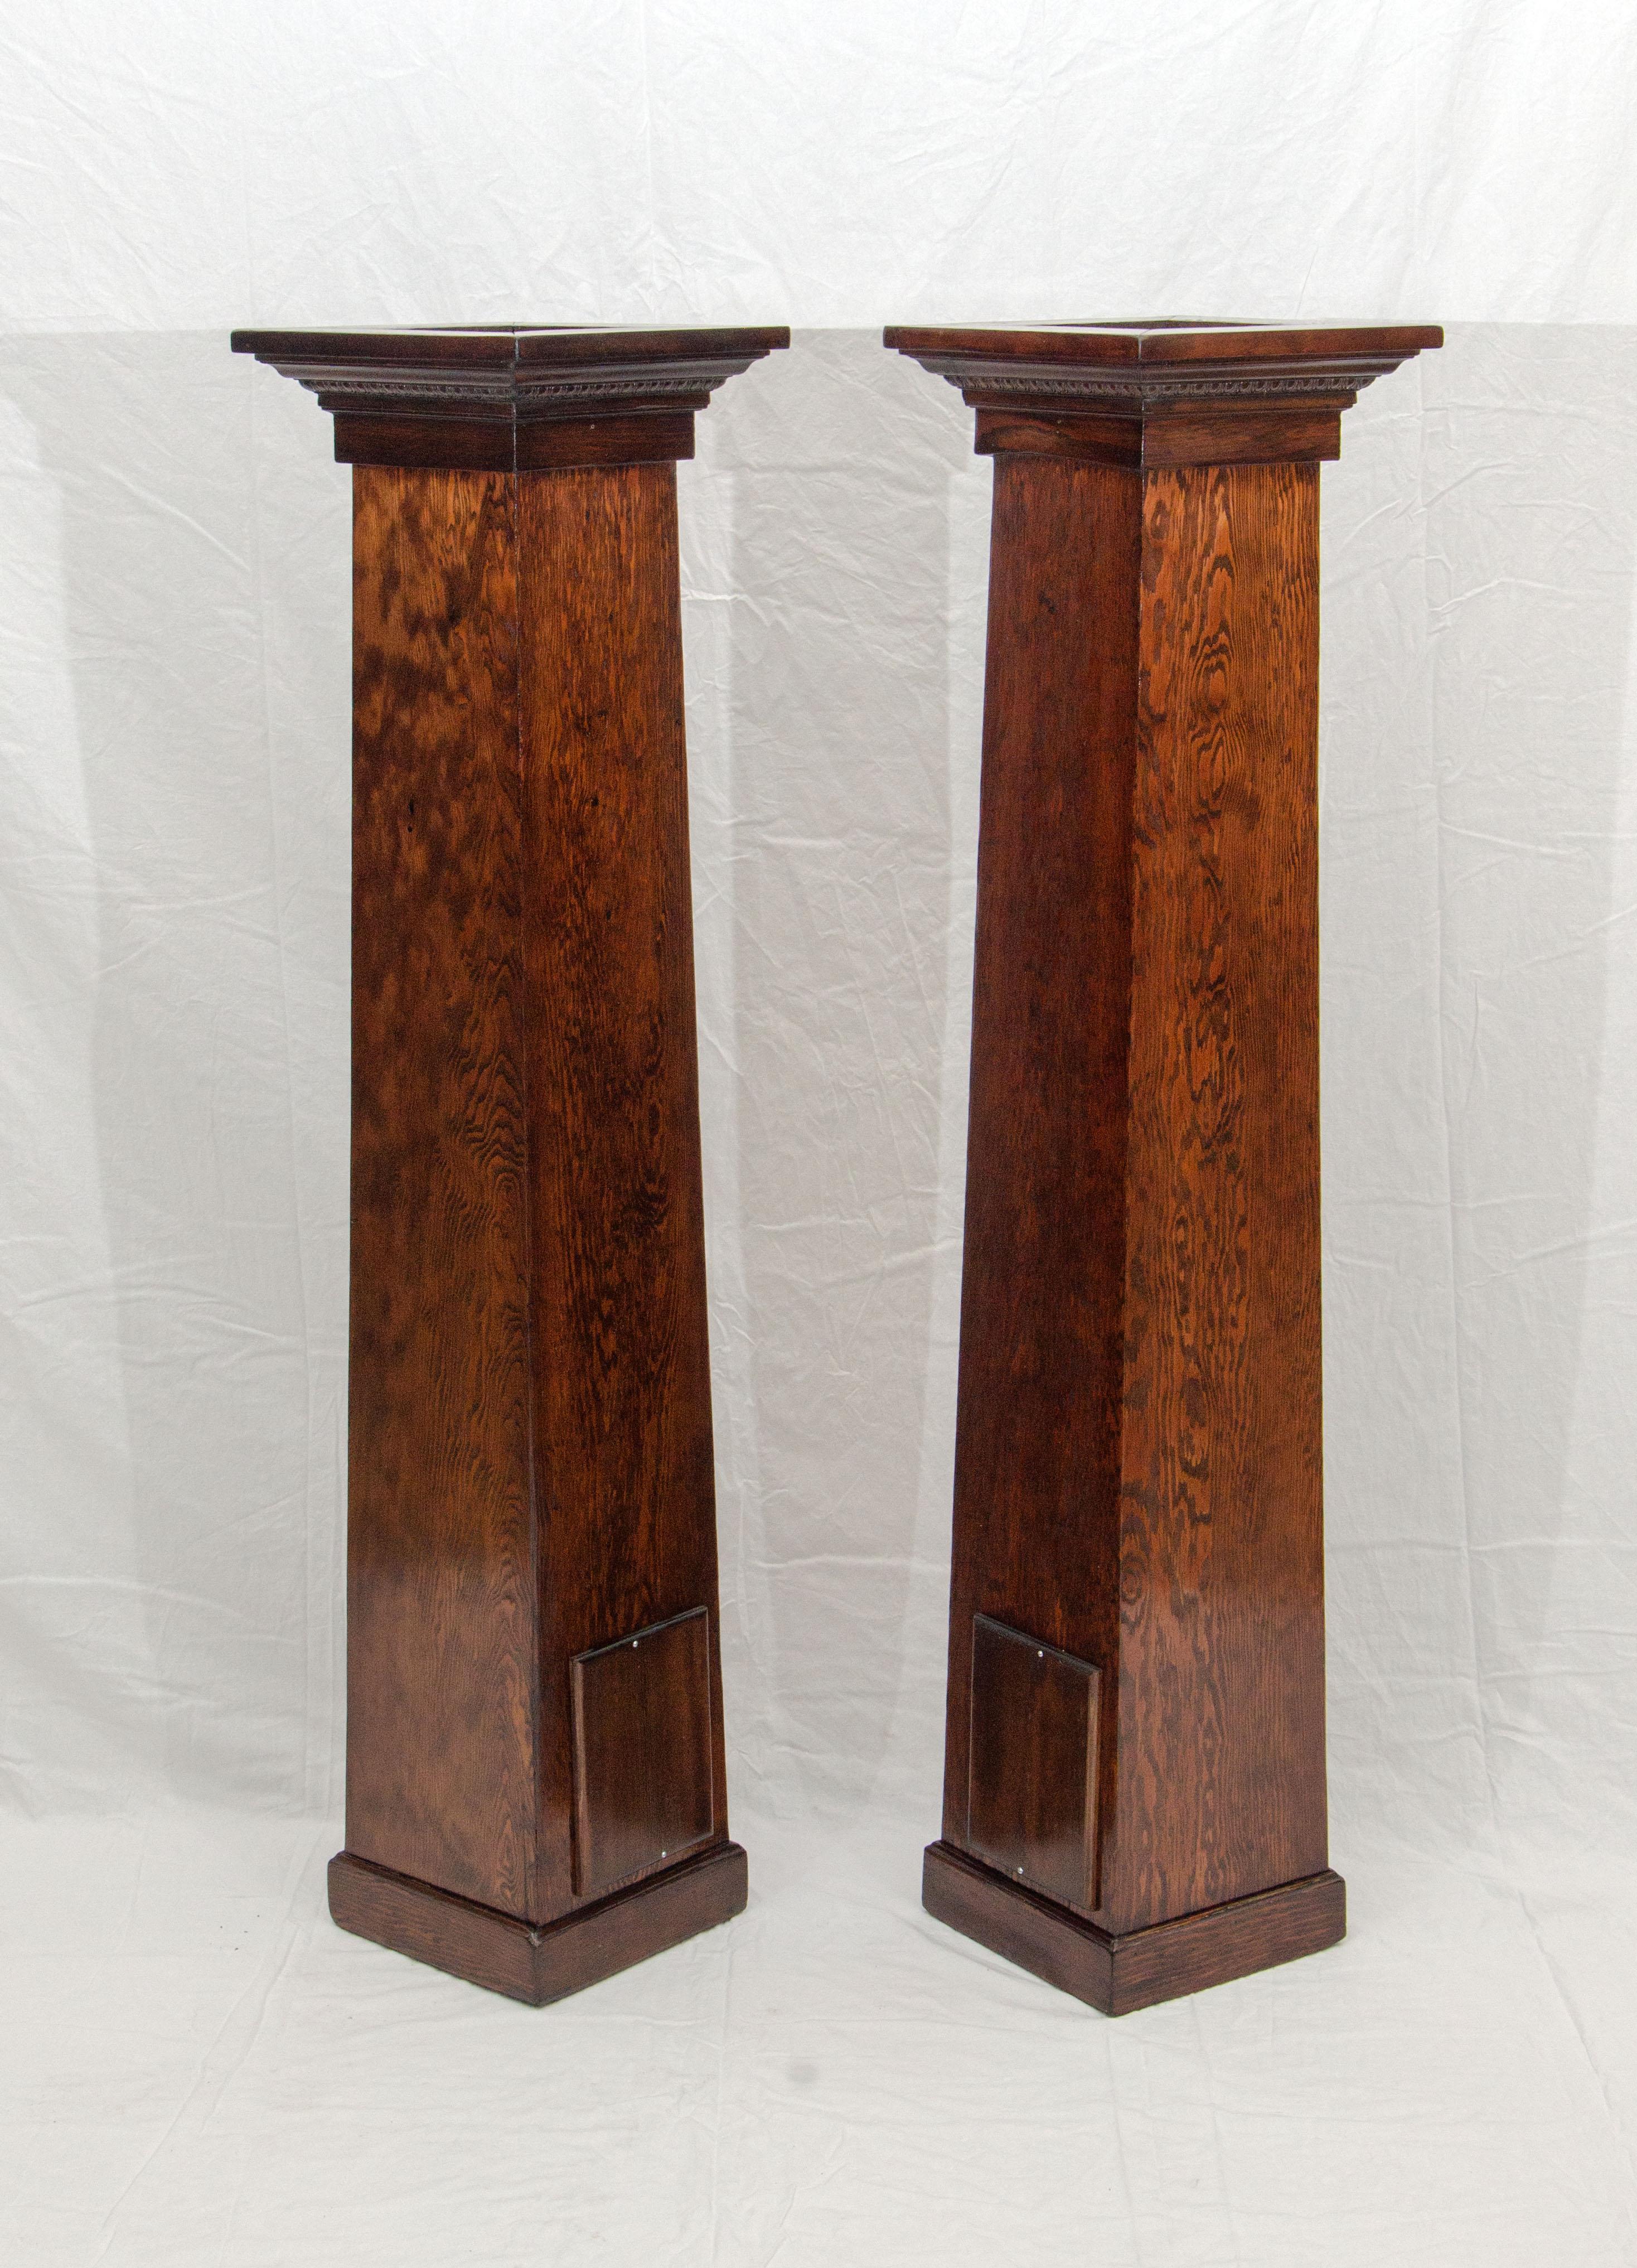 These columns were rescued from a 1940s Arts & Crafts style bungalow. The top section is accented with bead molding. The columns are slightly tapered, about a 1 1/4